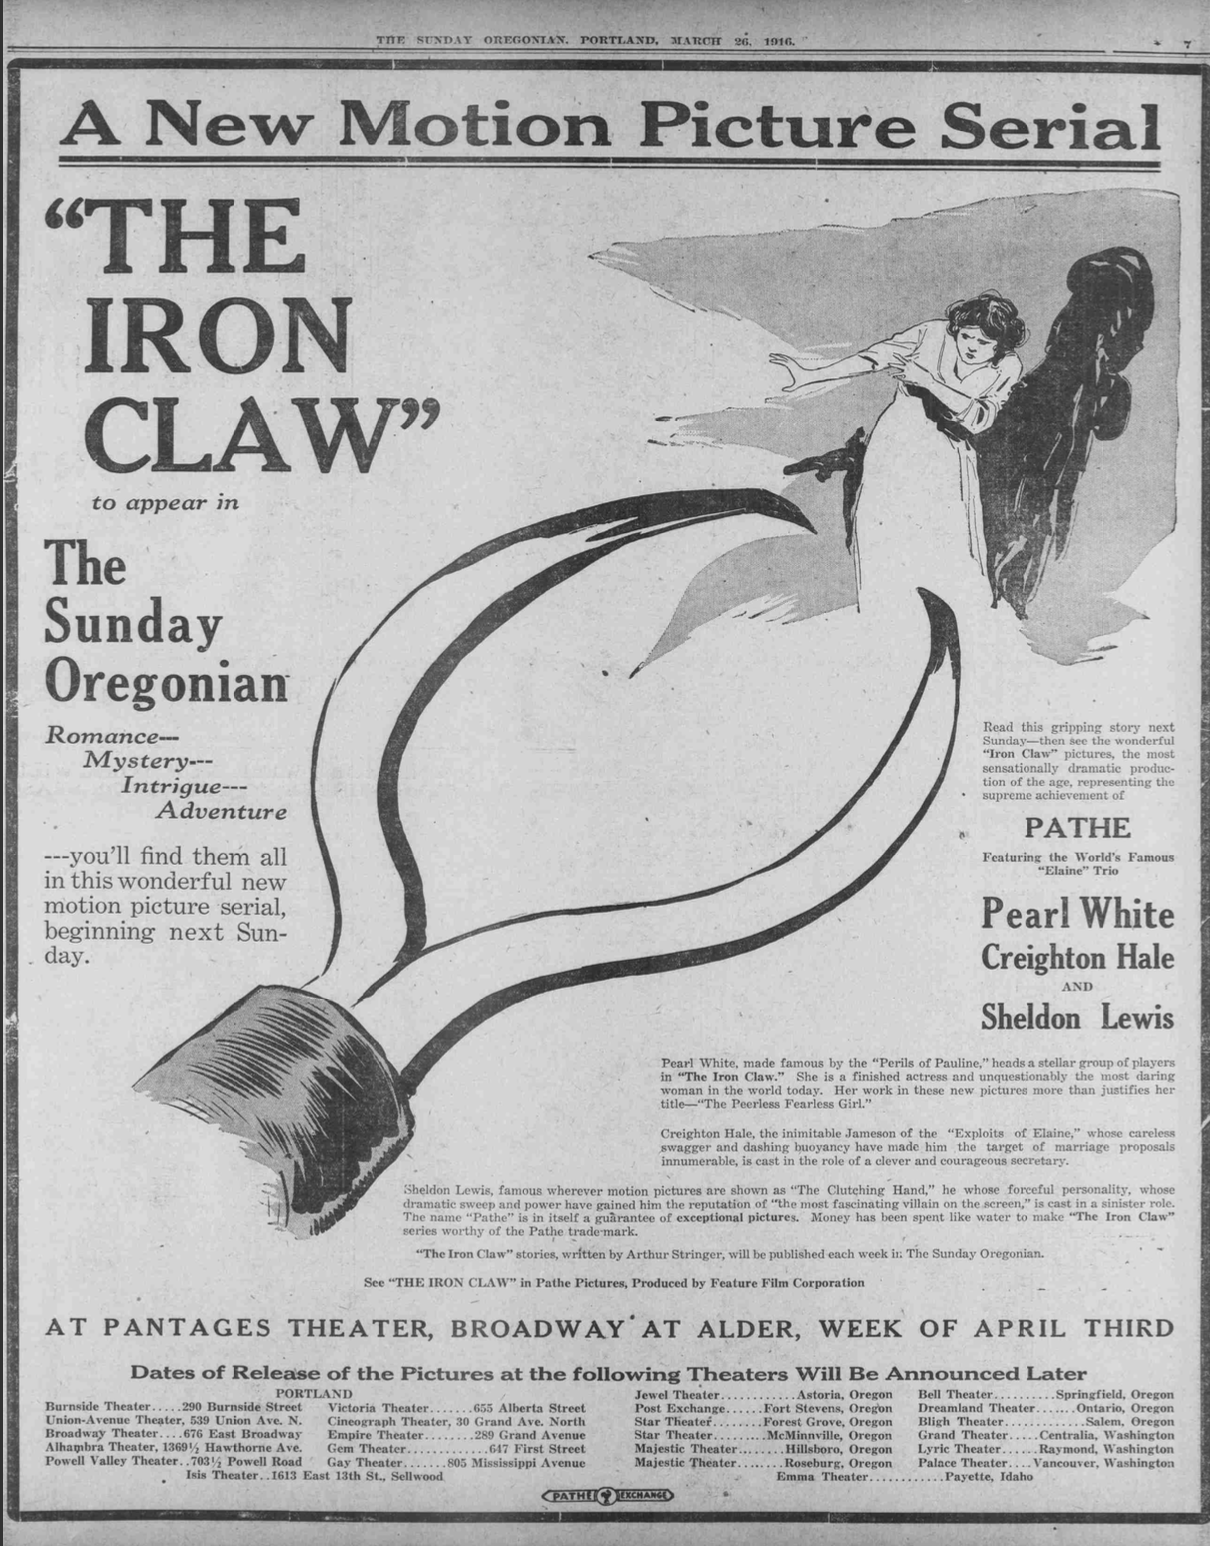 Sunday Oregonian, advertisement for The Iron Claw